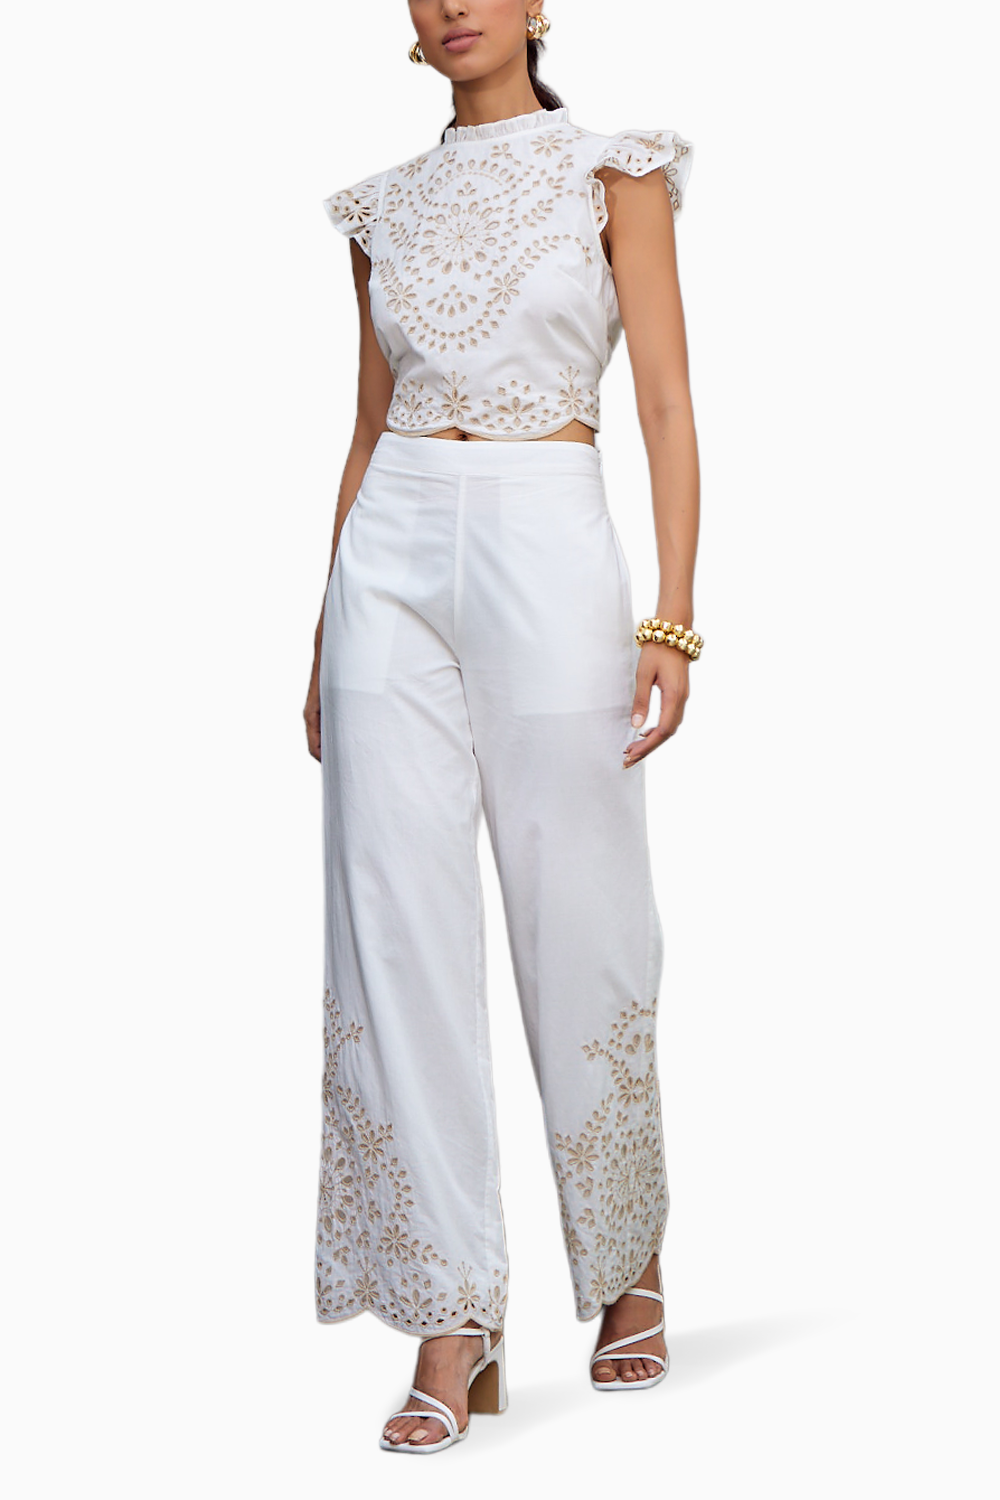 Romneya White Embroidered Top